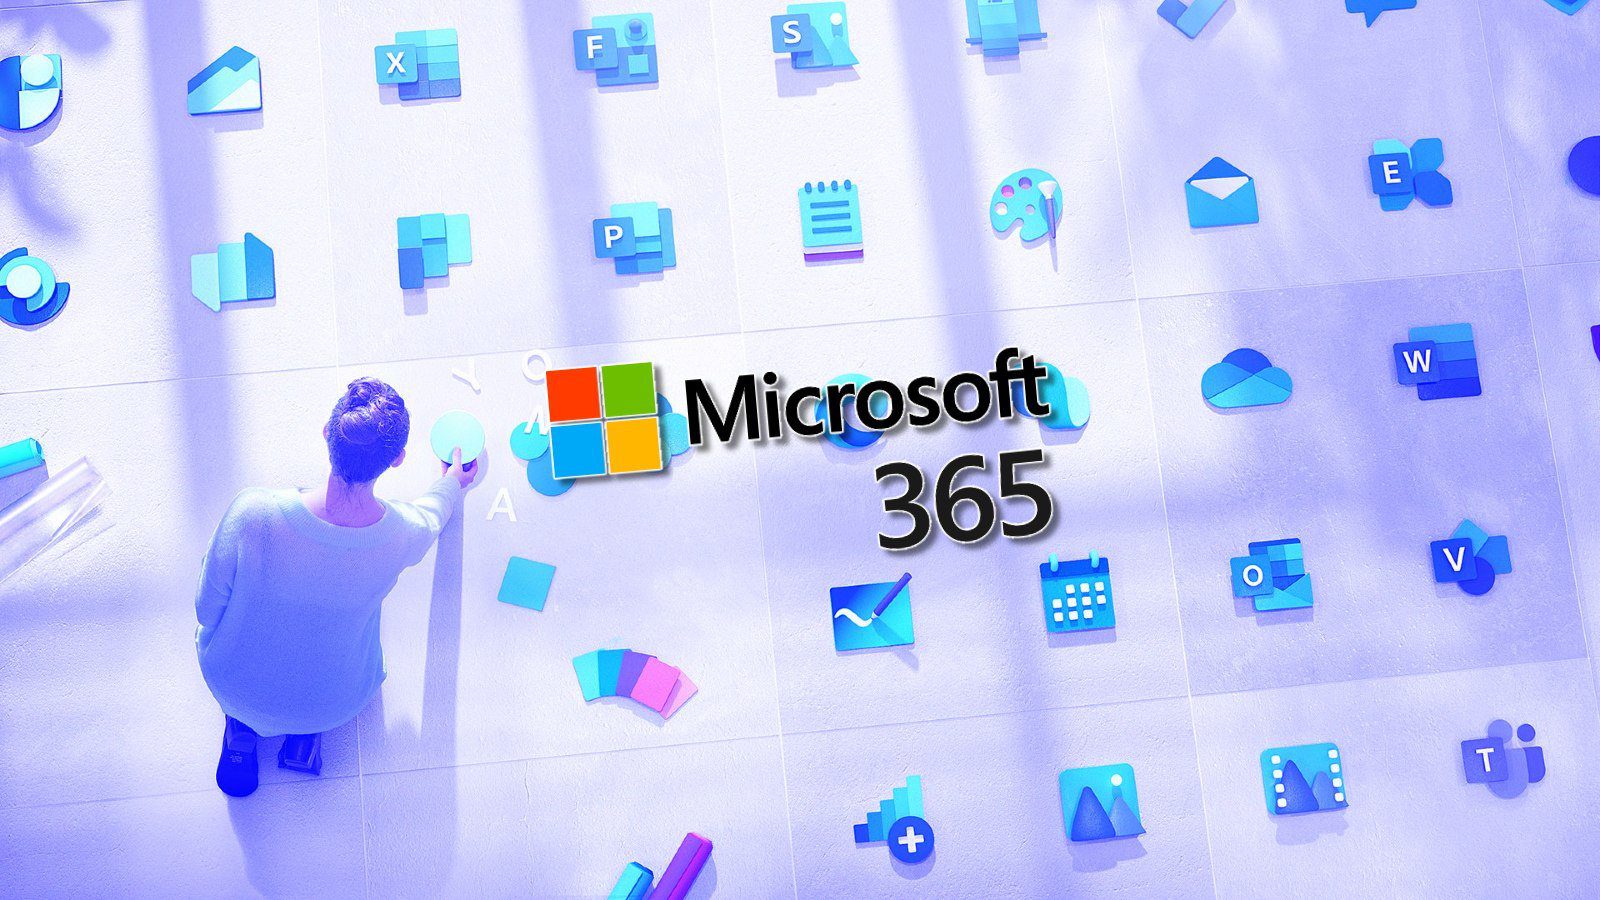 Microsoft 365 hit by new outage causing connectivity issues – Source: www.bleepingcomputer.com